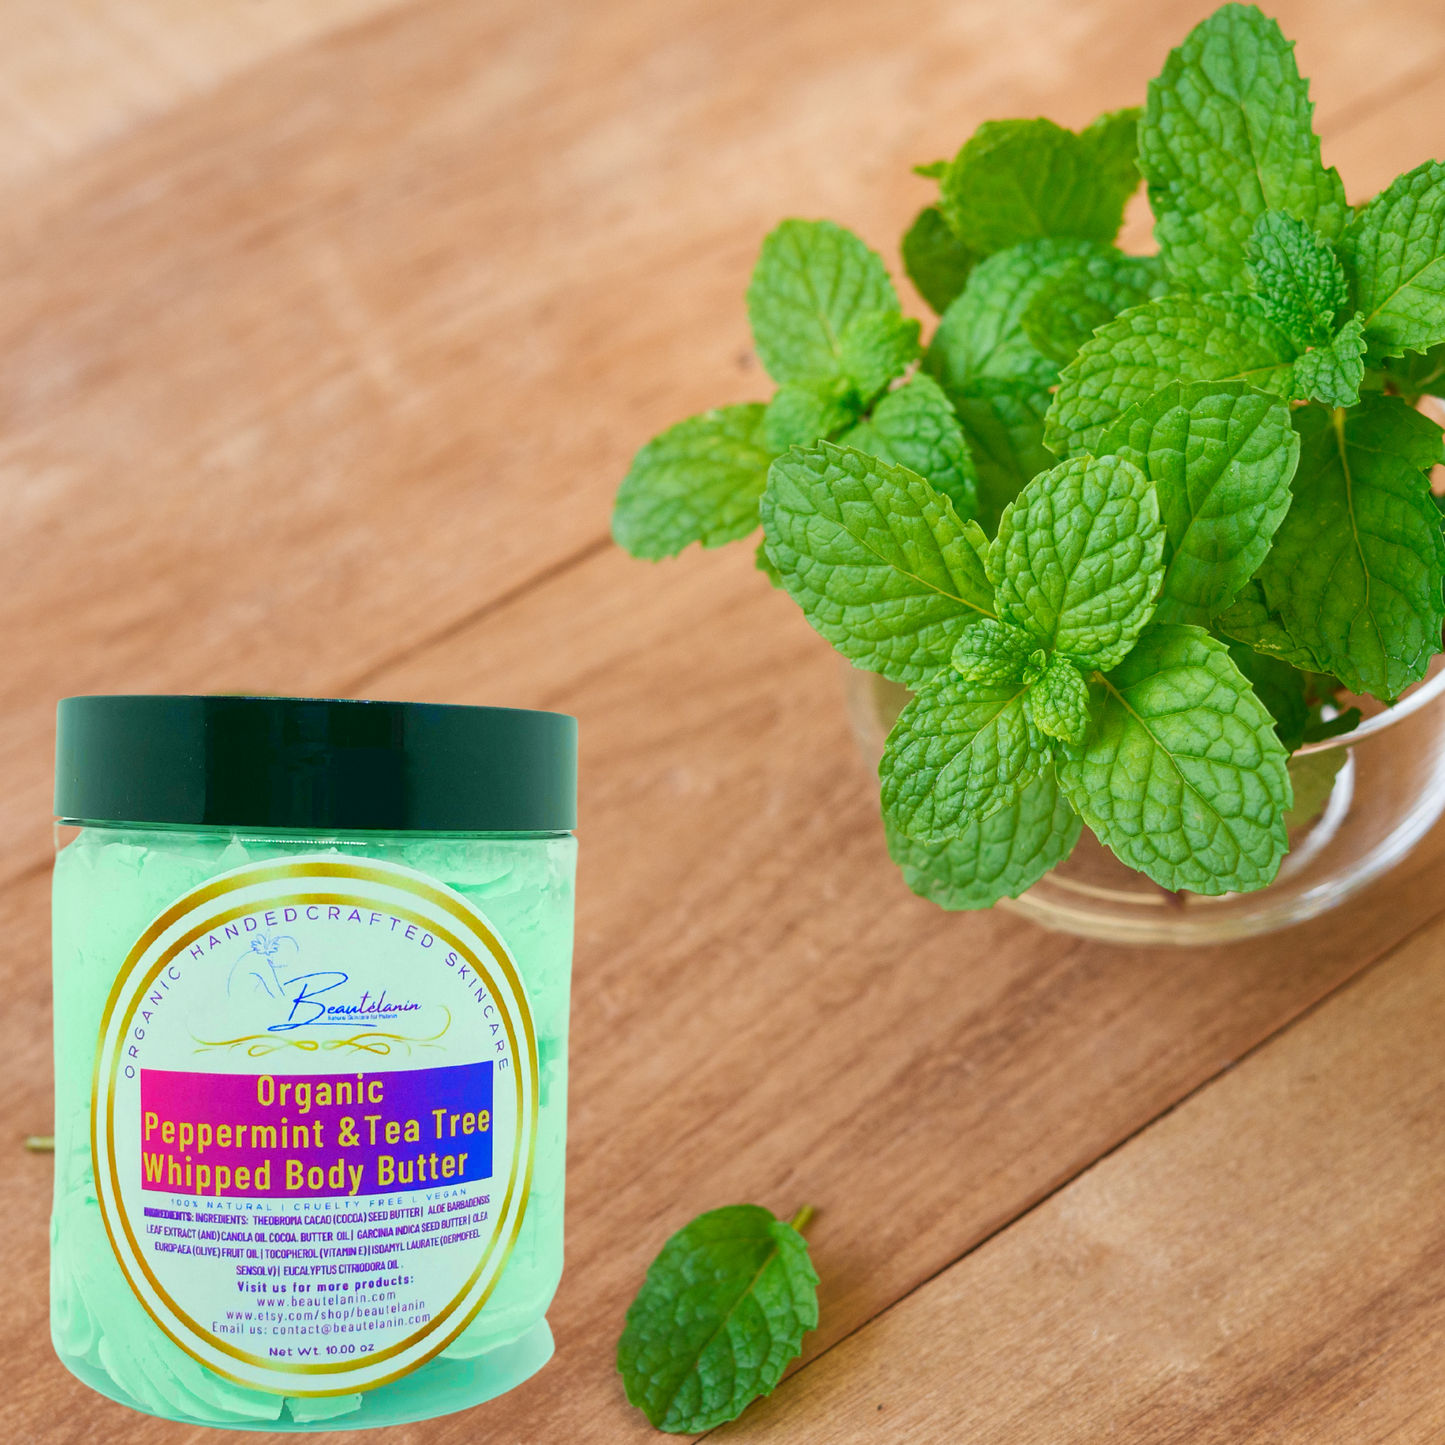 Organic Peppermint & Tea Tree Whipped Body Butter